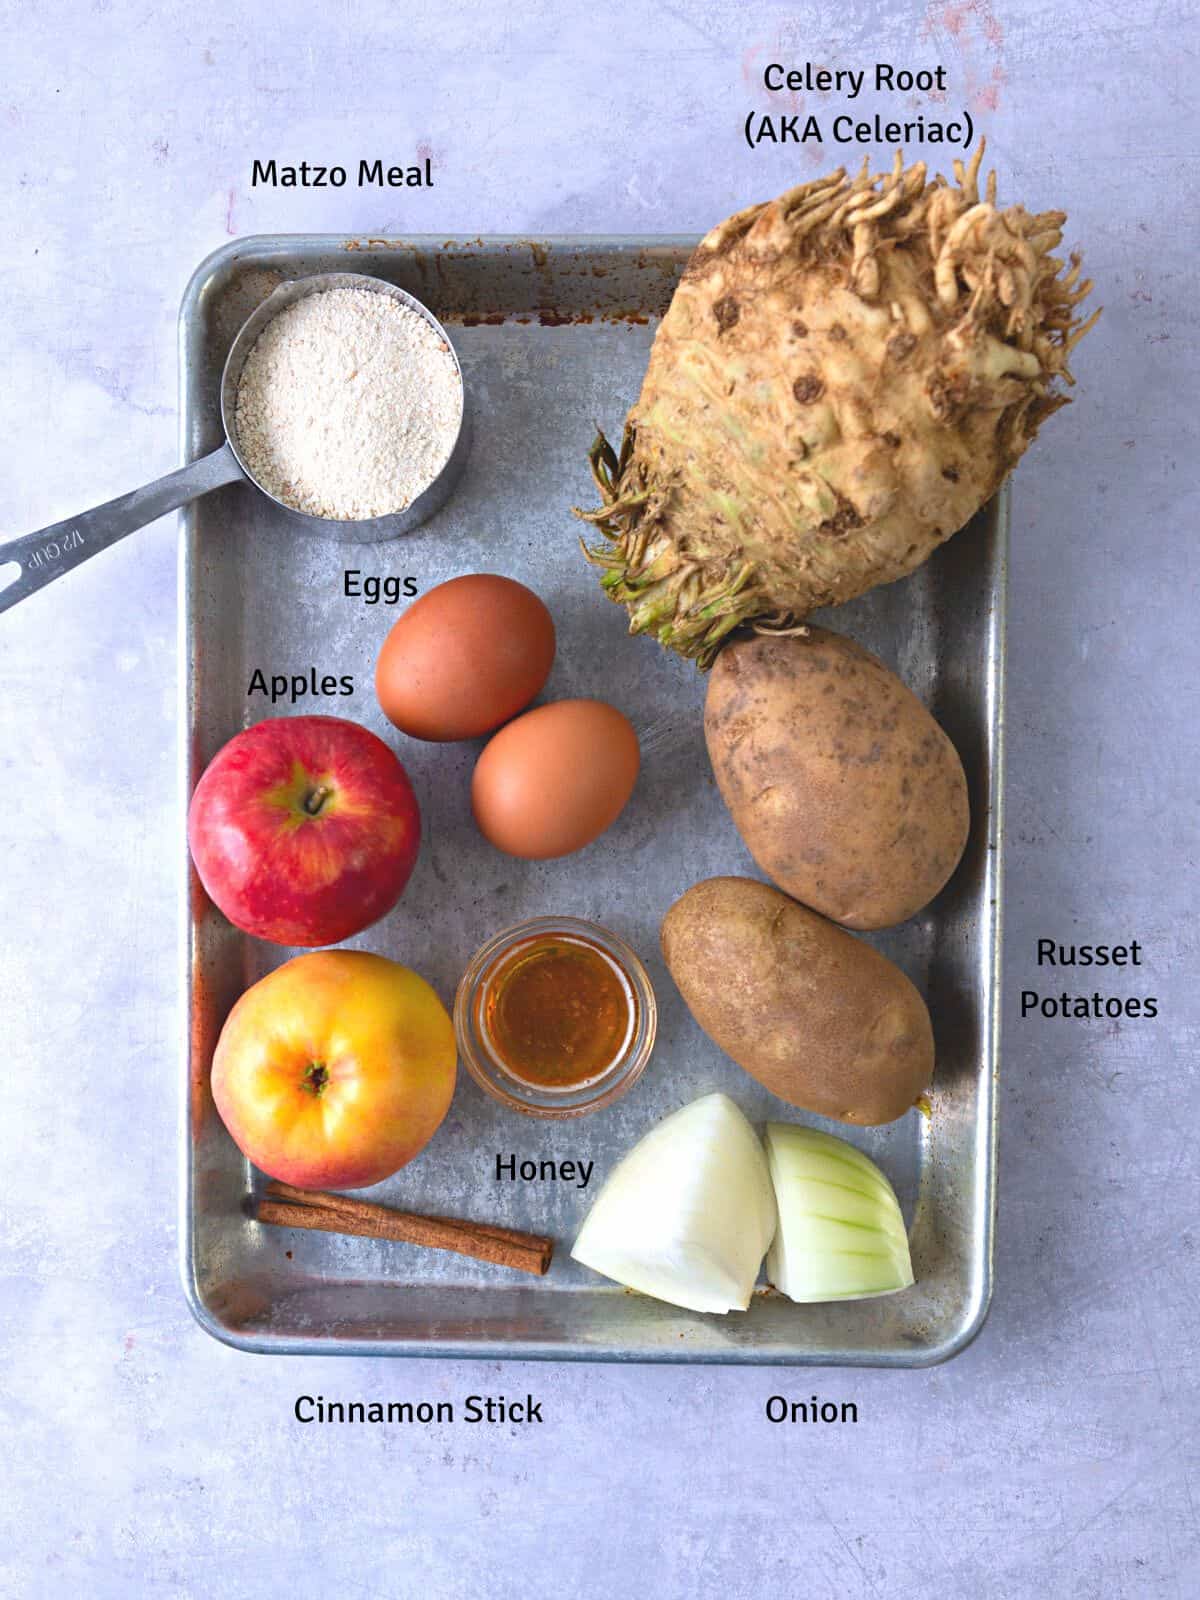 Ingredients for celery root latkes, including potatoes, eggs, matzo meal and ingredients for homemade applesauce.